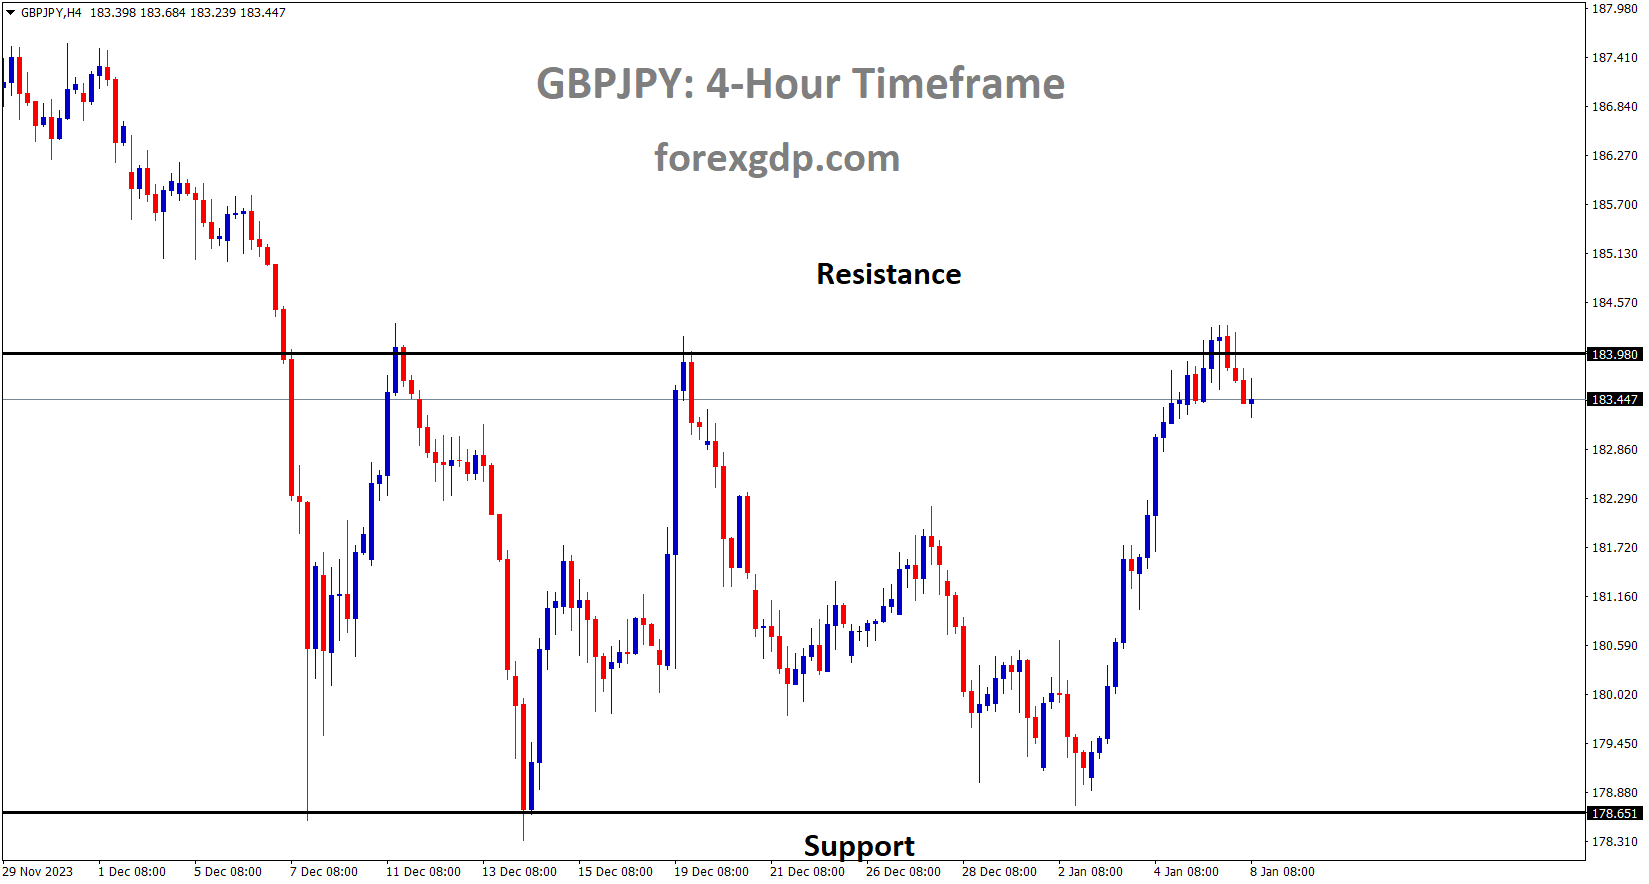 GBPJPY is moving in the Box pattern and the market has fallen from the resistance area of the pattern